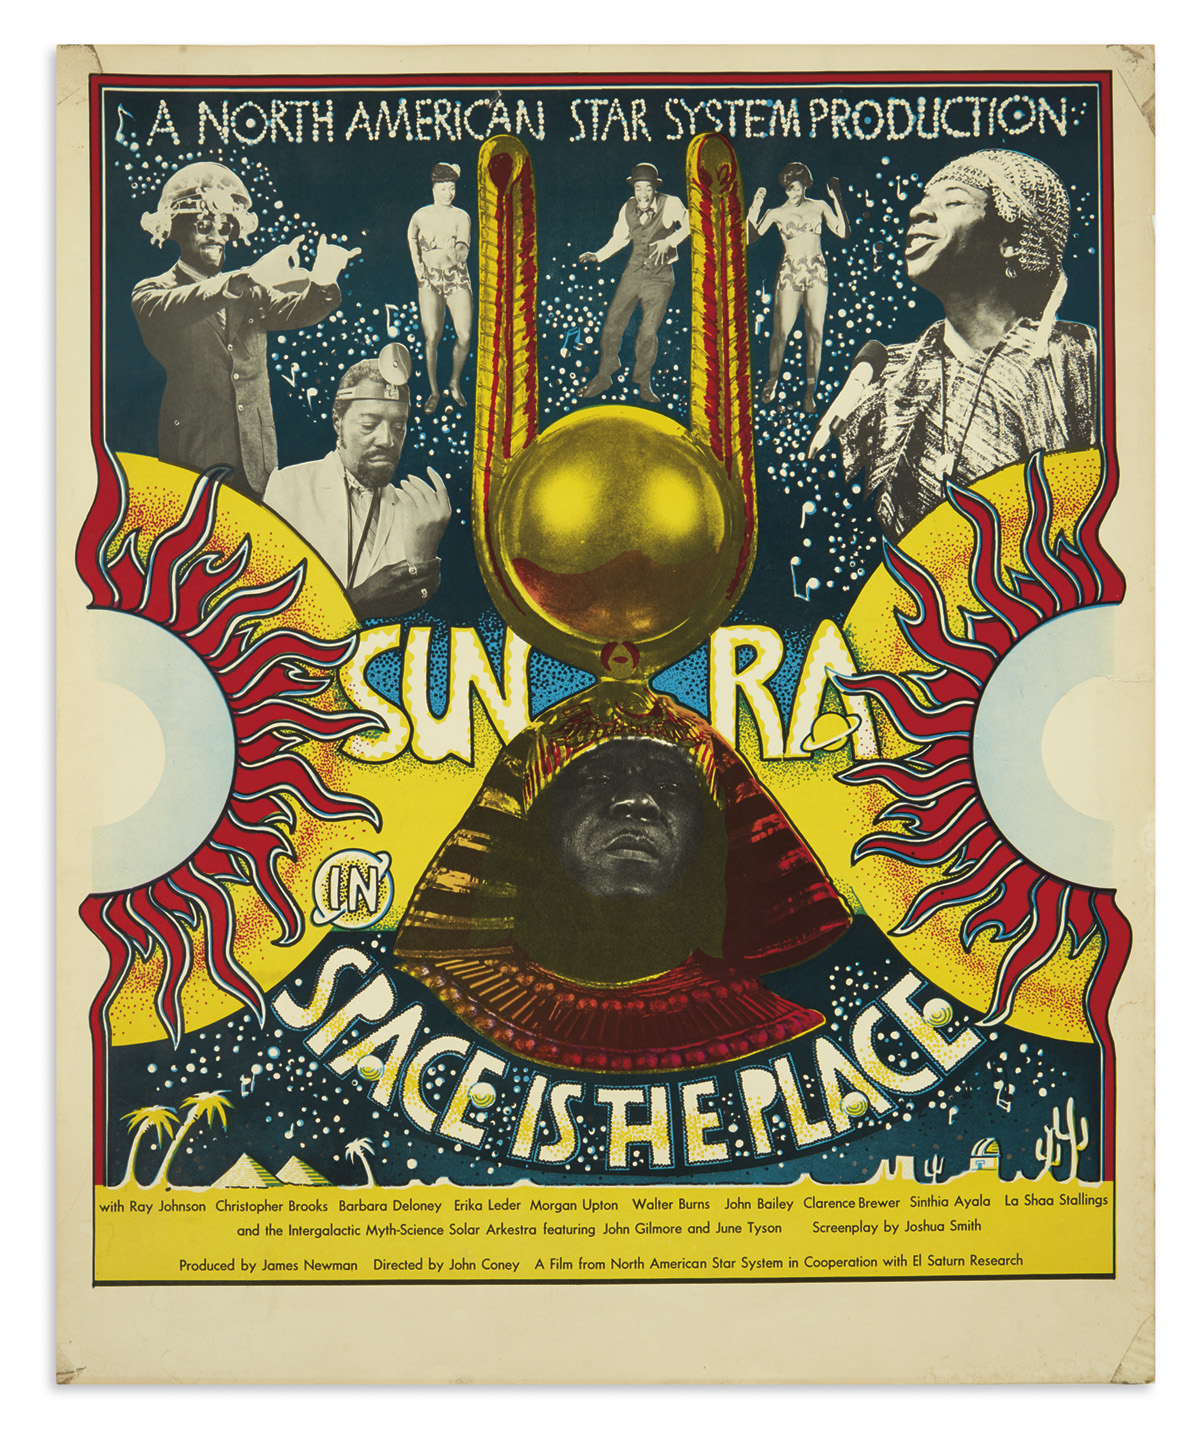 (MUSIC.) Sun Ra in Space is the Place.